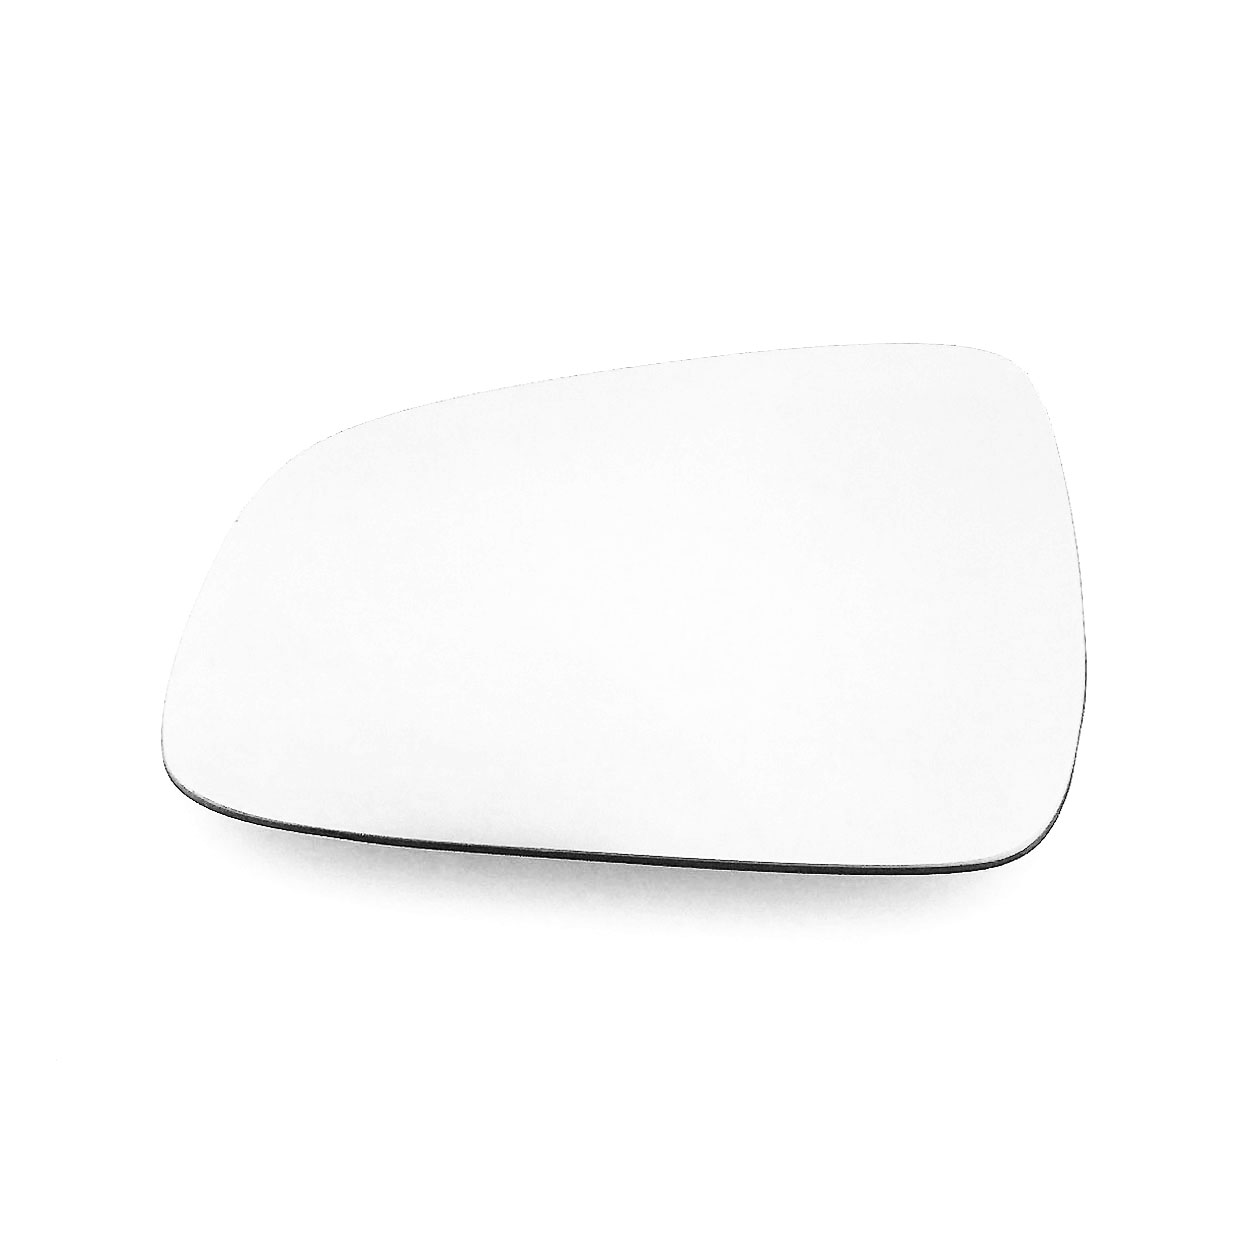 Toyota Prius Wing Mirror Glass LEFT HAND ( UK Passenger Side ) 2015 to 2020 – Convex Wing Mirror